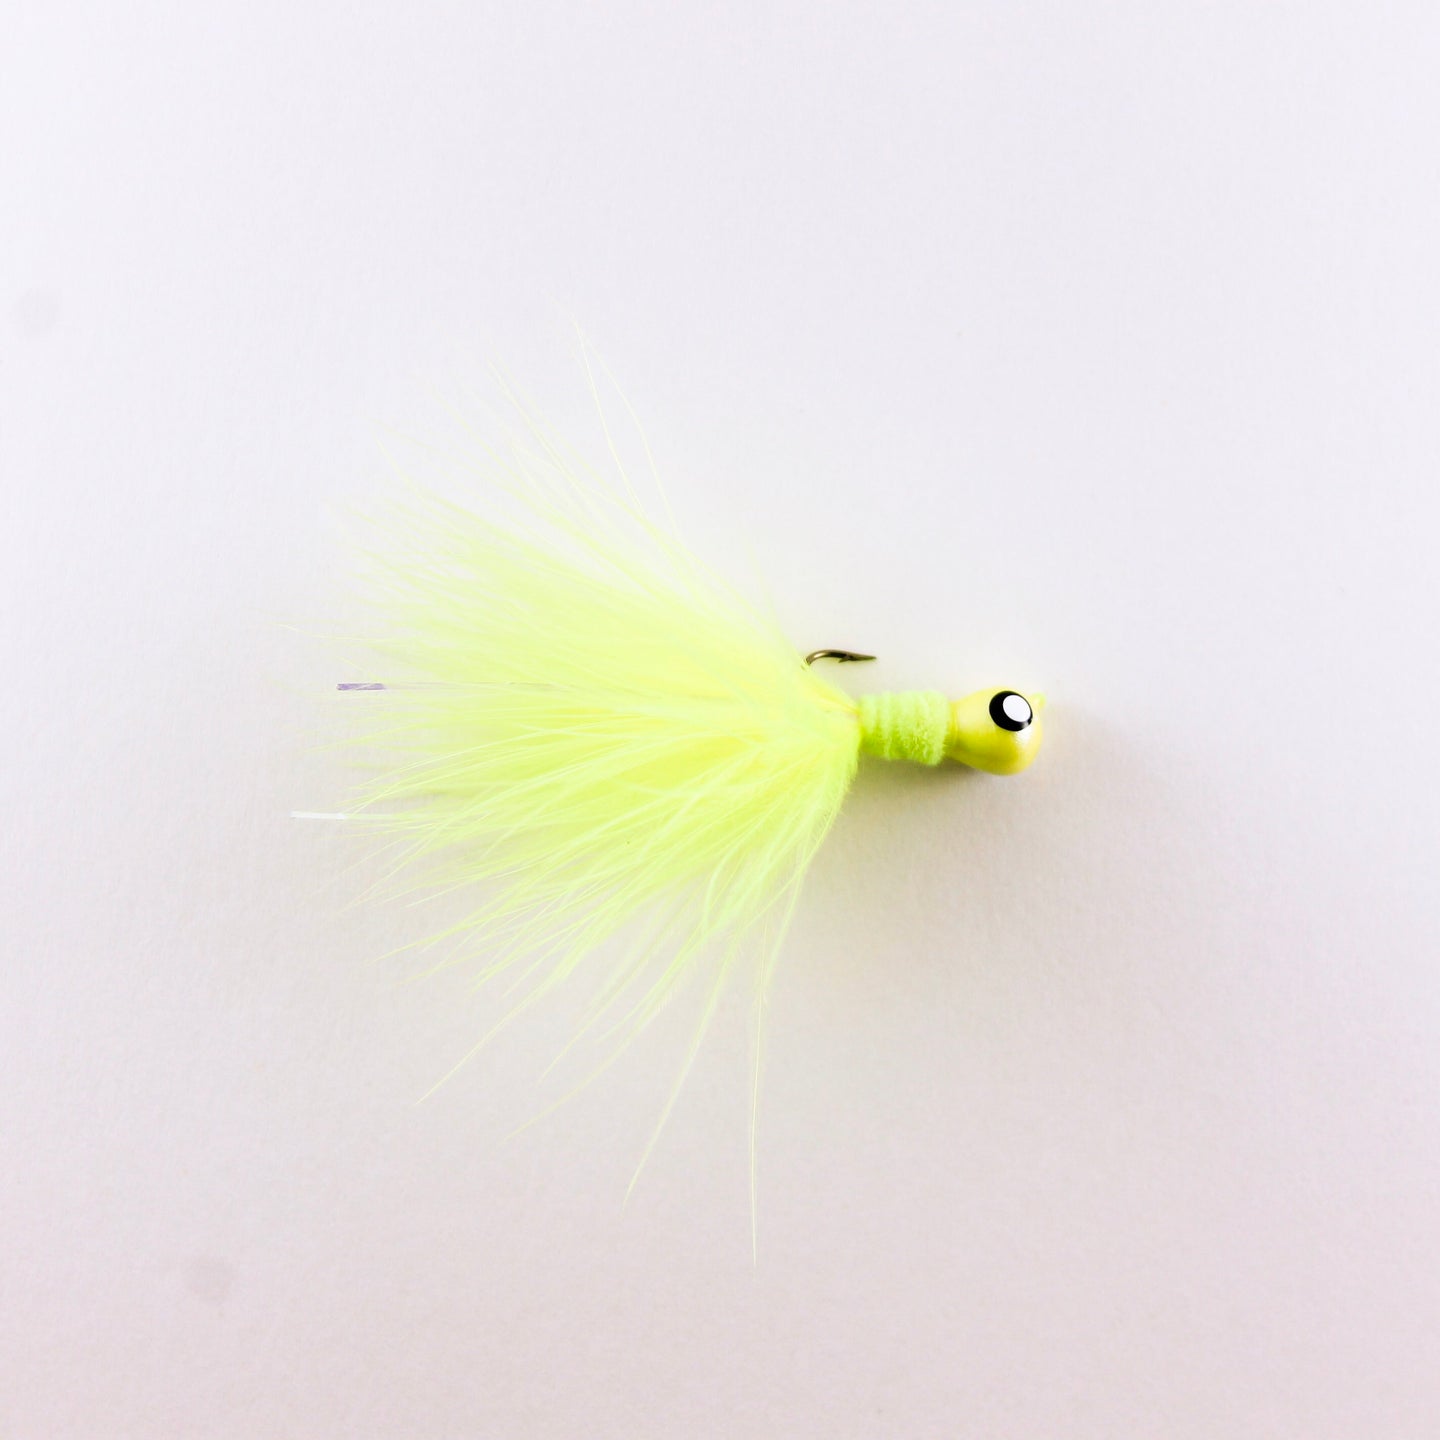 Yellow Chartreuse